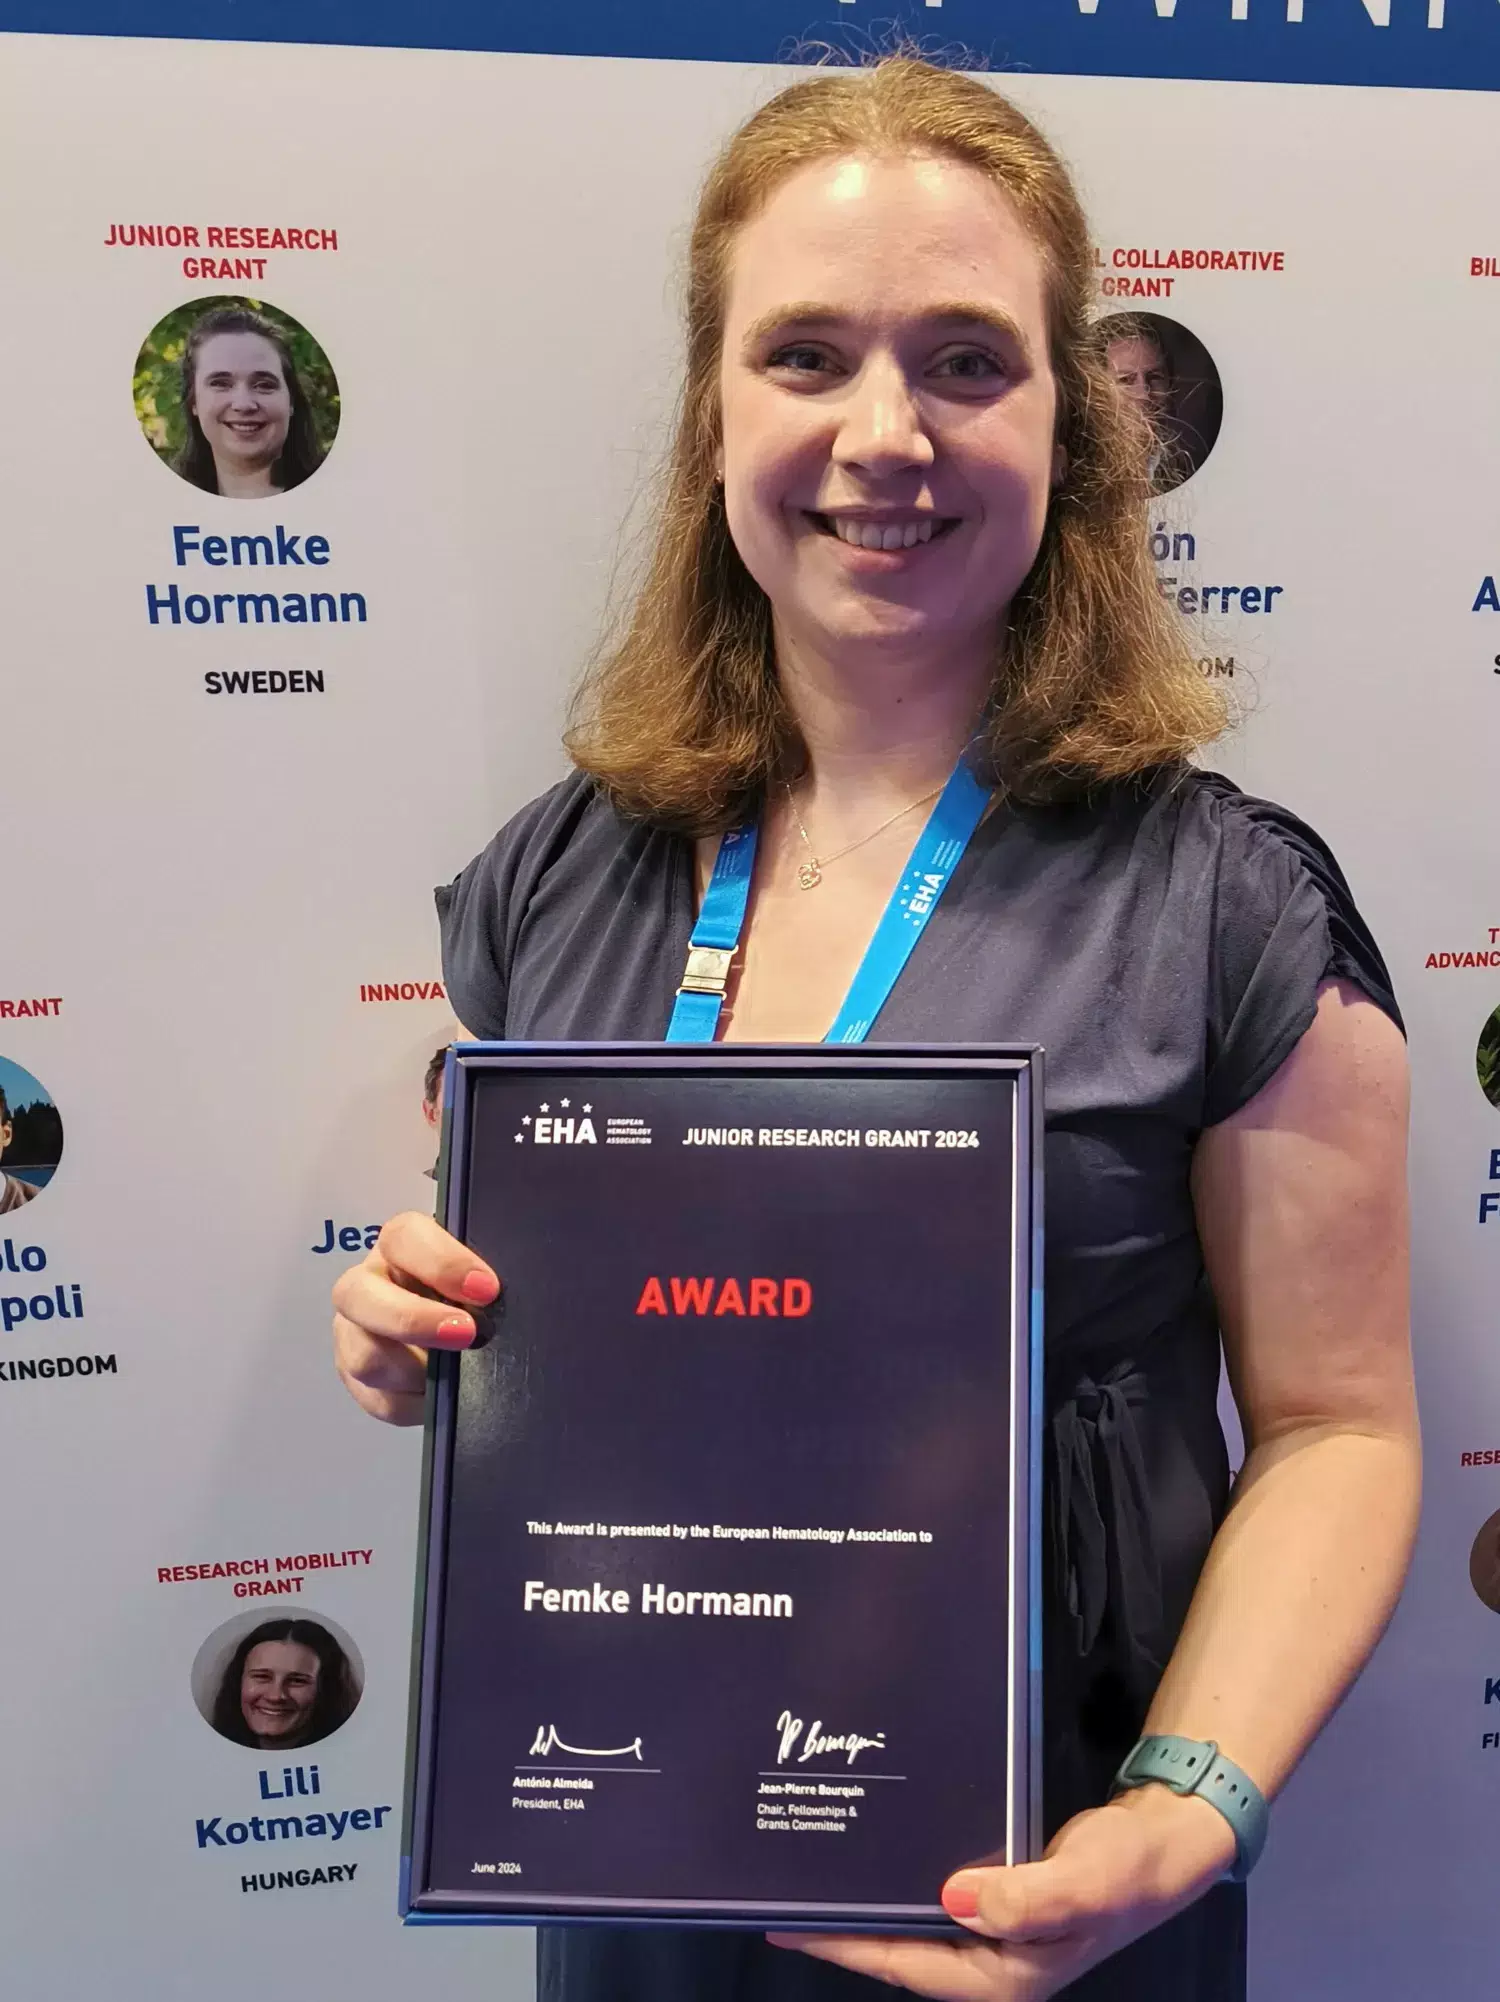 Femke Hormann is holding a diploma for the junior reserch grant from the European hematology association.